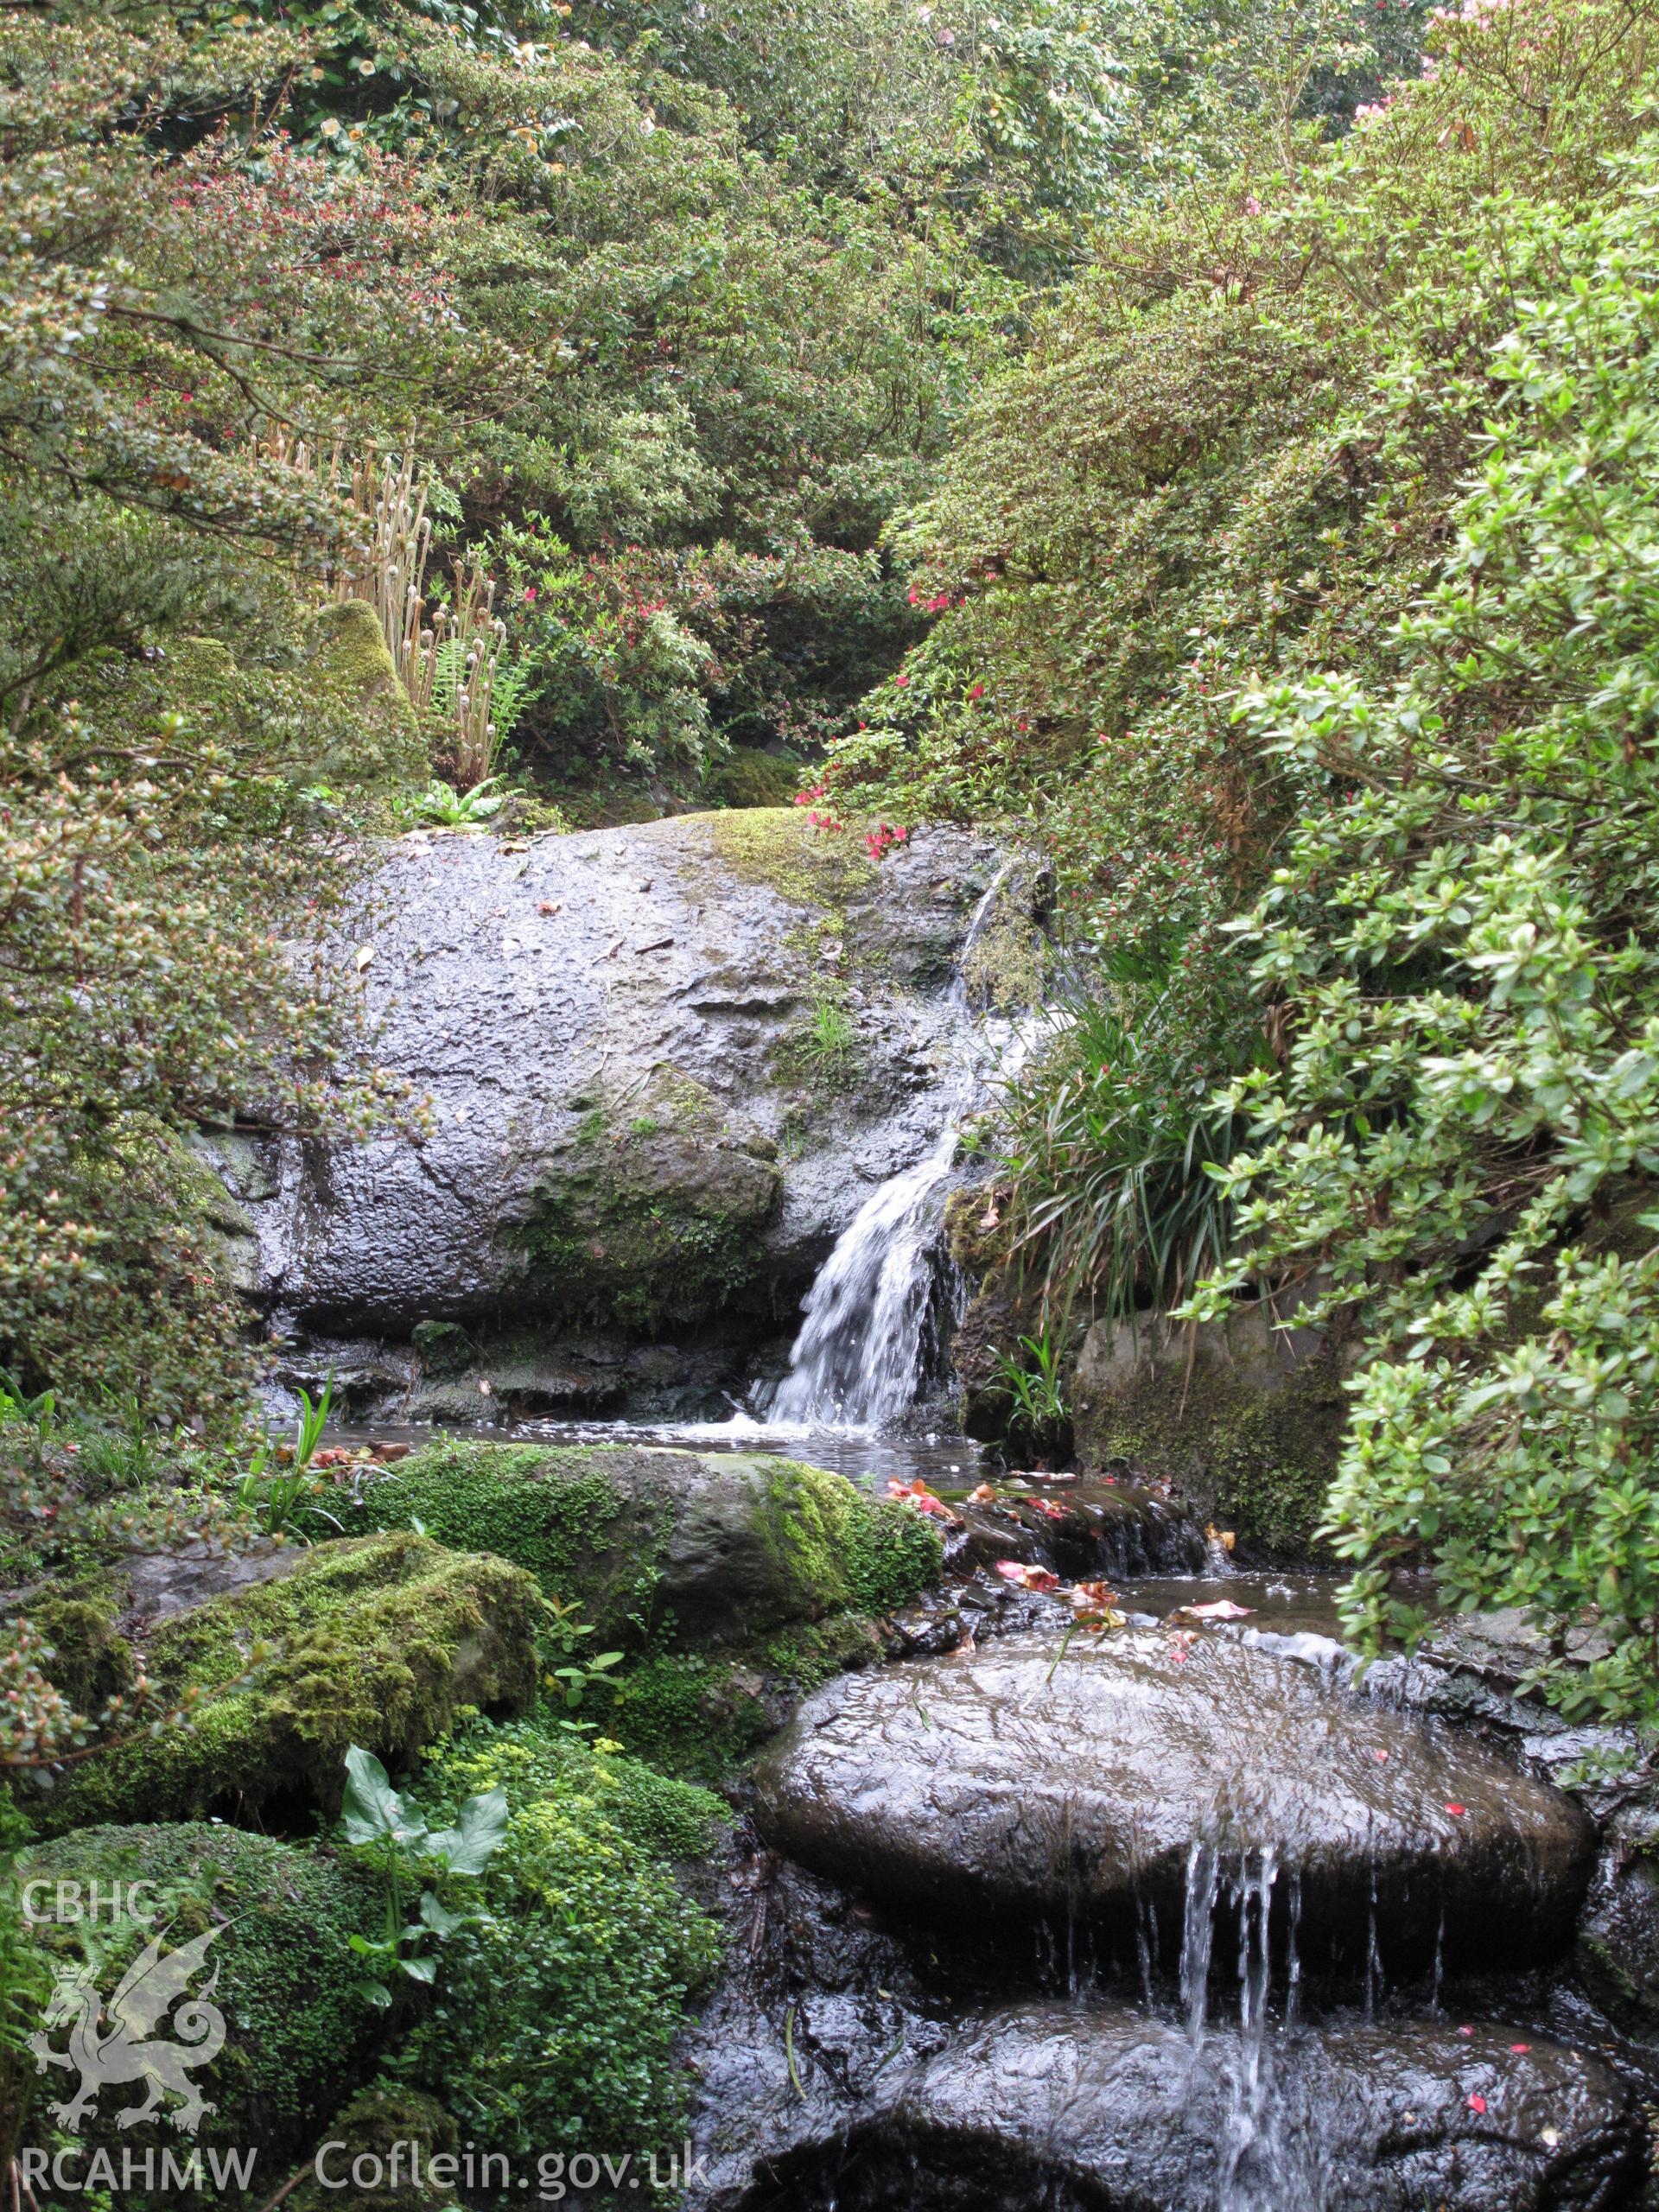 One of the waterfalls in the Dingle to the south of the Pin Mill, looking northeast.